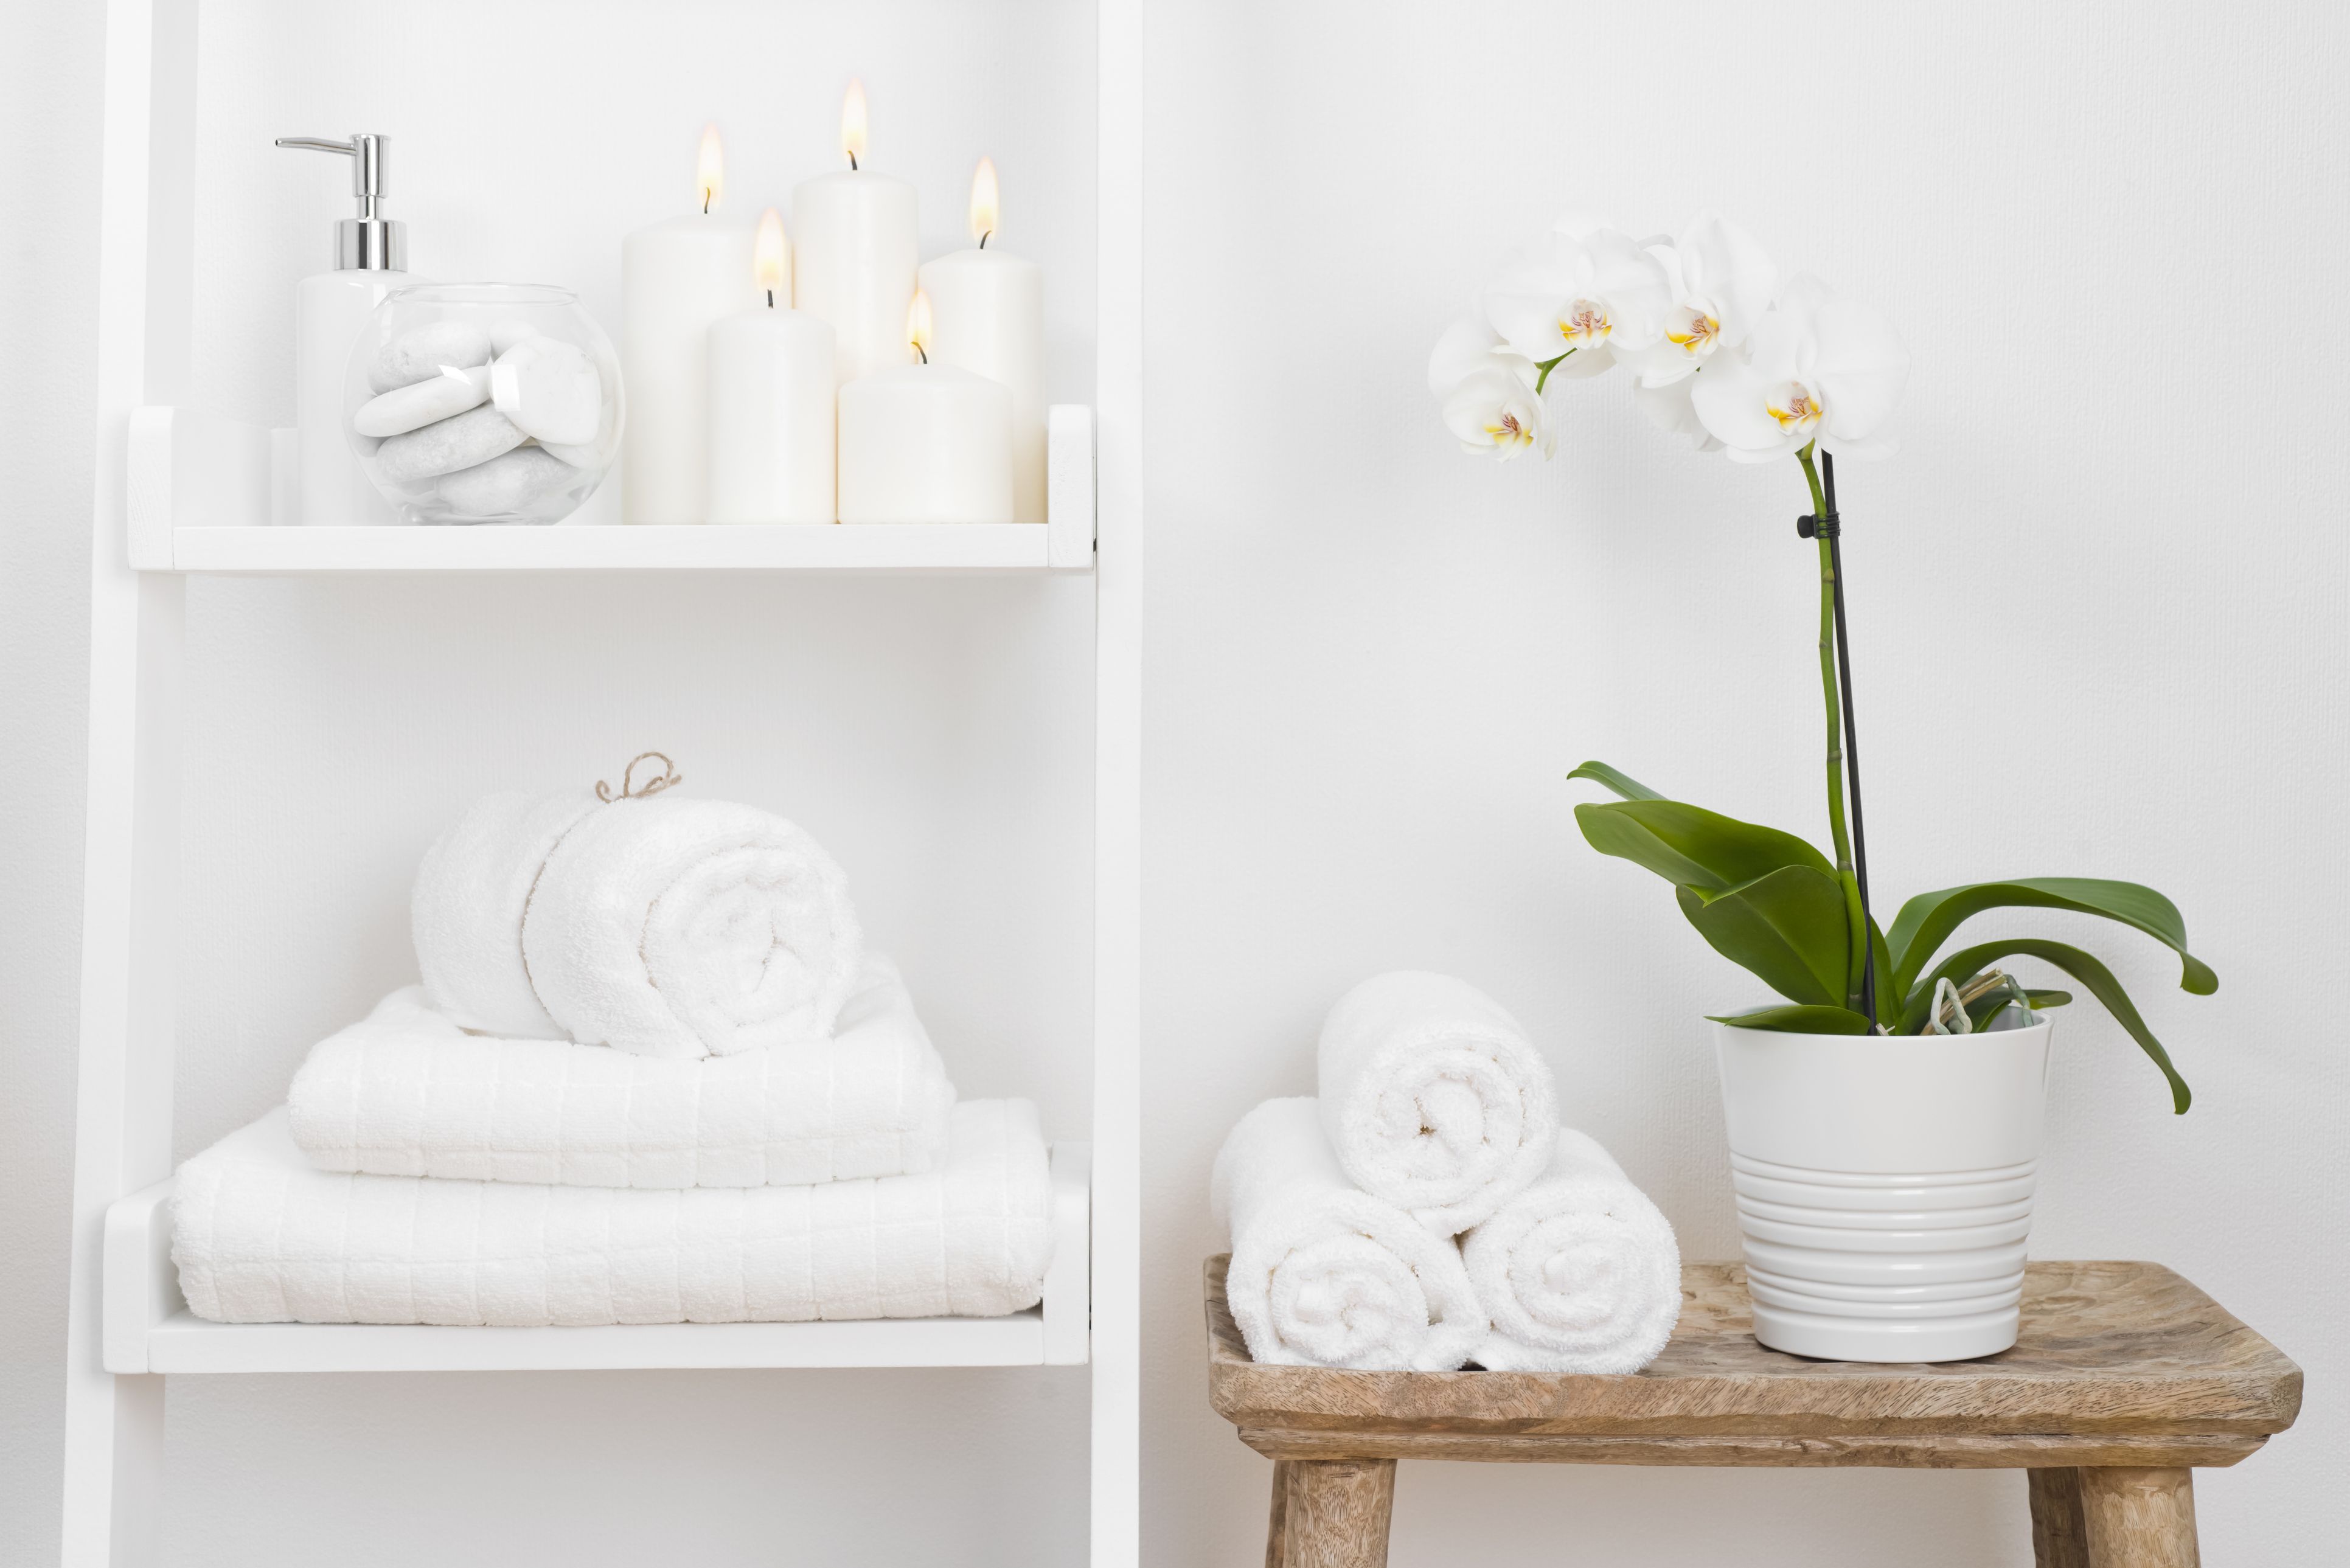 Everything You Need to Know About the Difference Between our Bath Shee